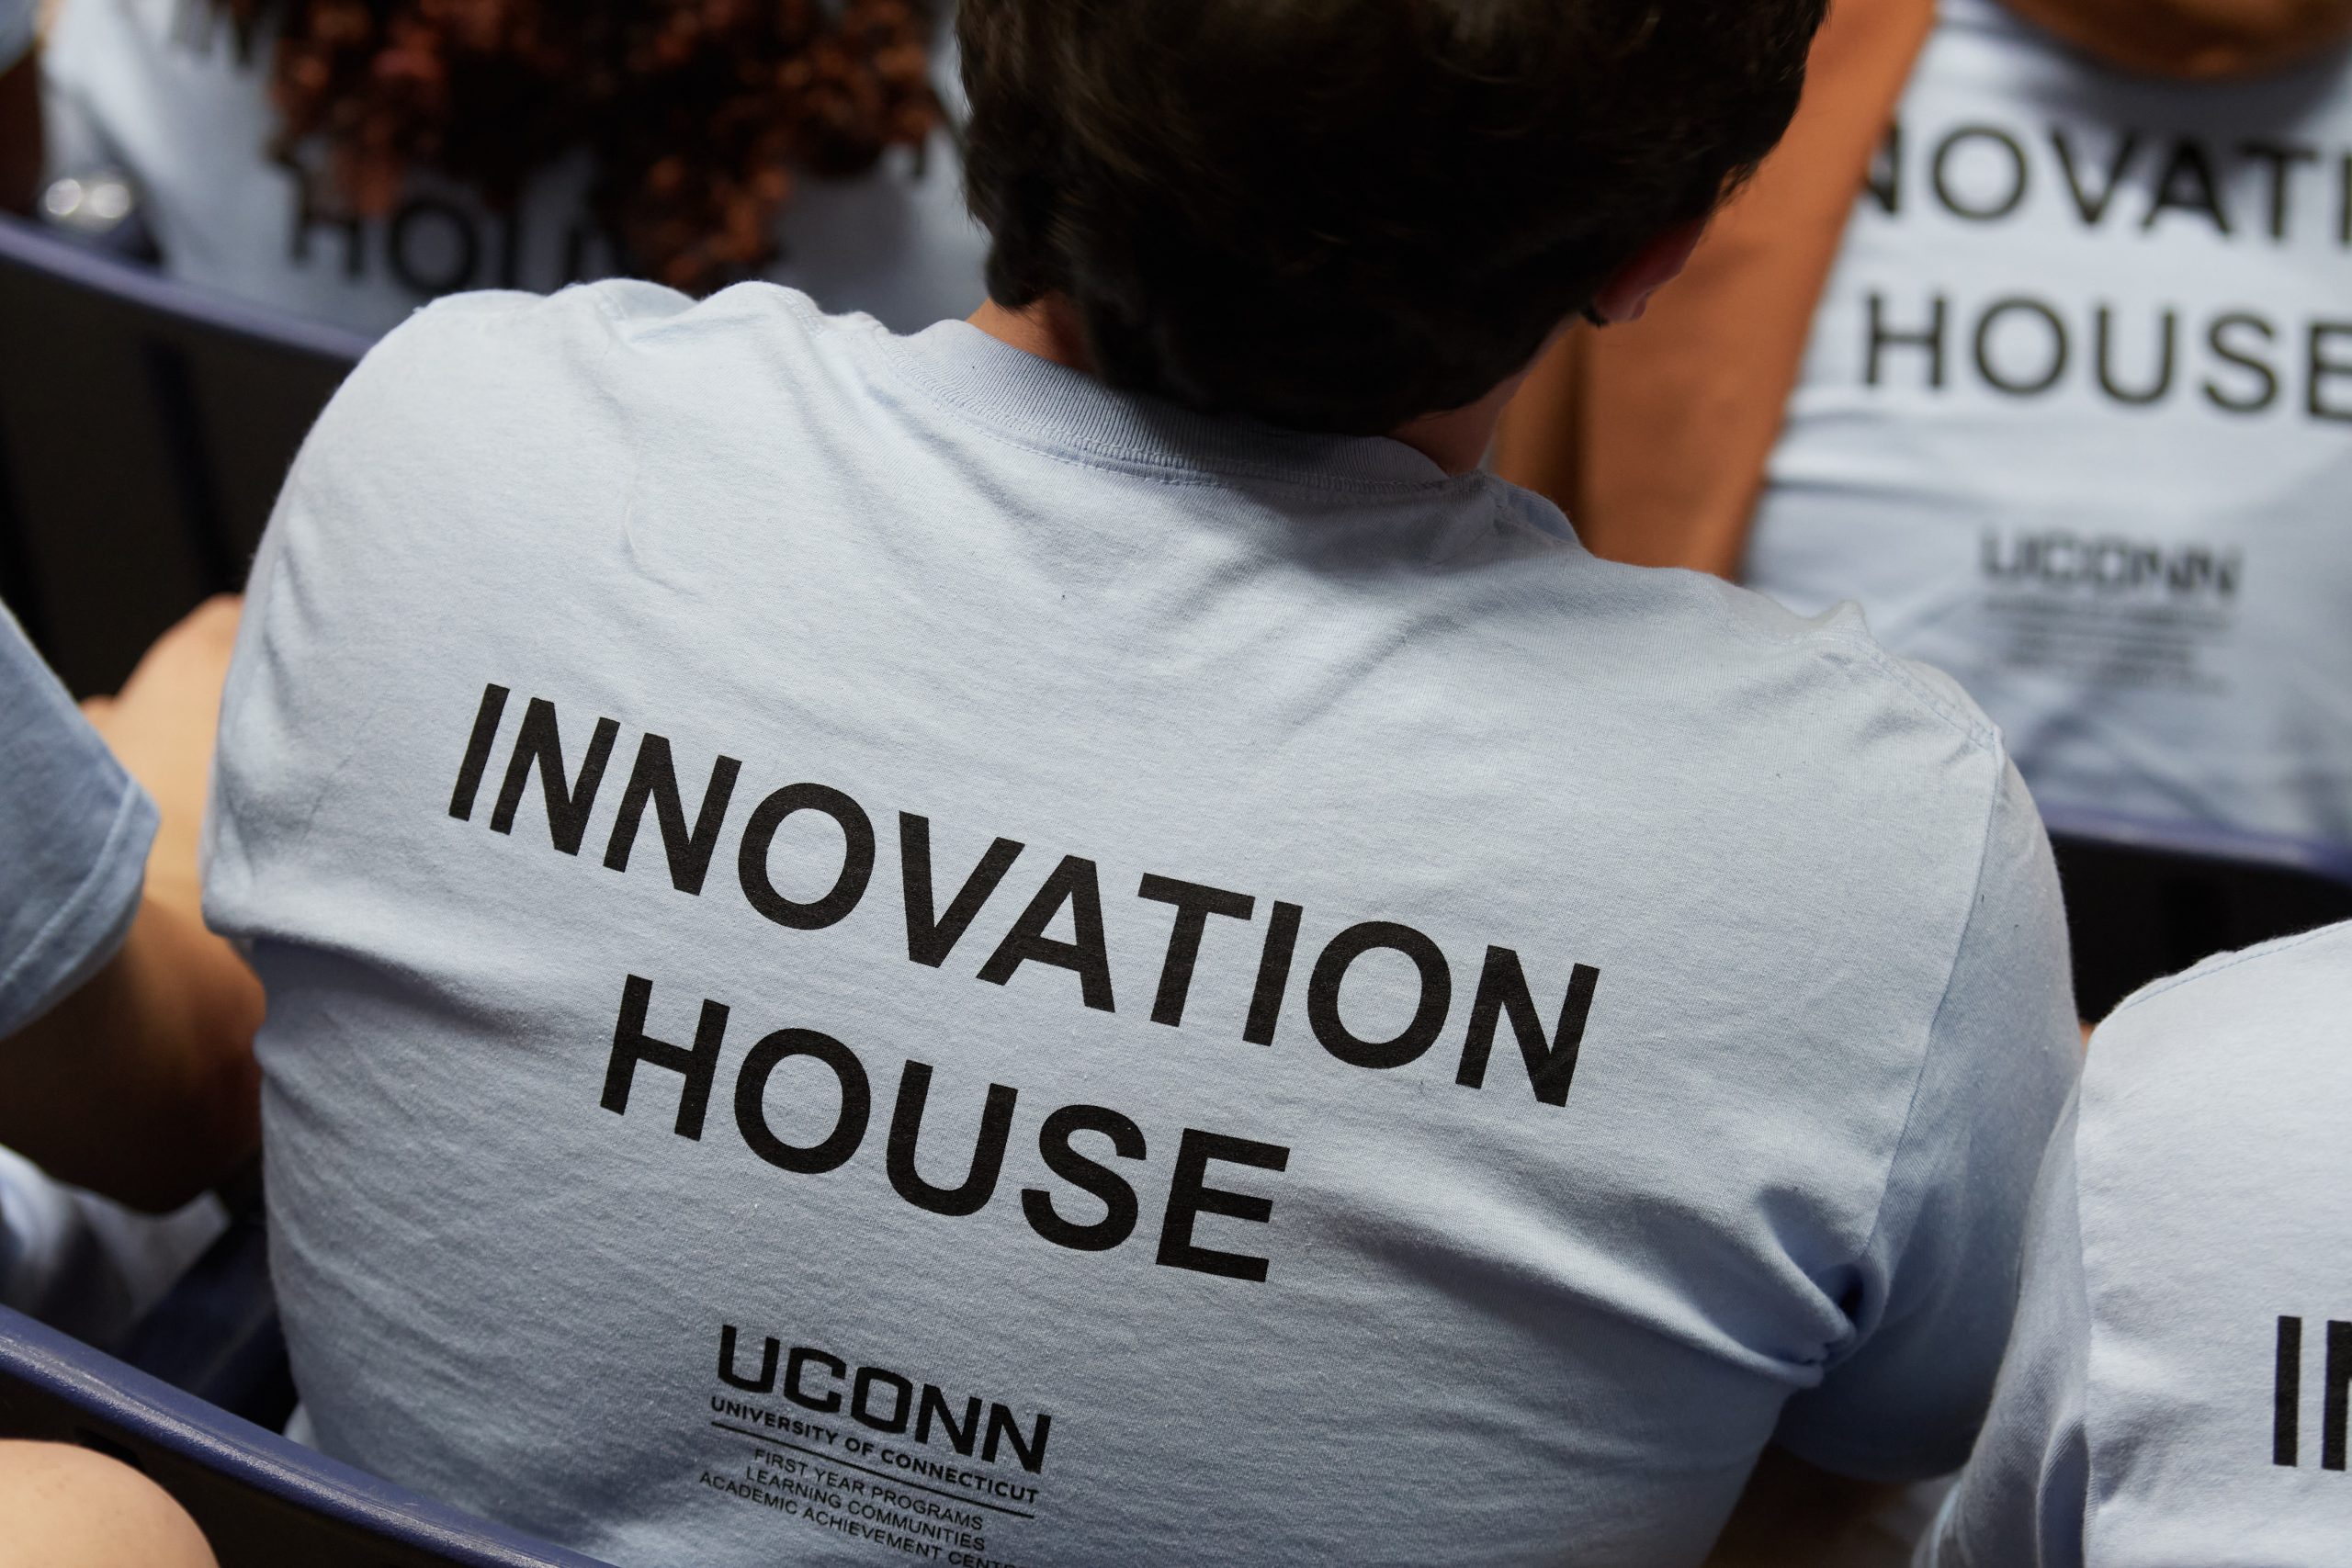 A t-shirt seen during the 13th annual Learning Communities Kickoff event at Gampel Pavillion on Aug. 29, 2021. (Peter Morenus/UConn Photo)